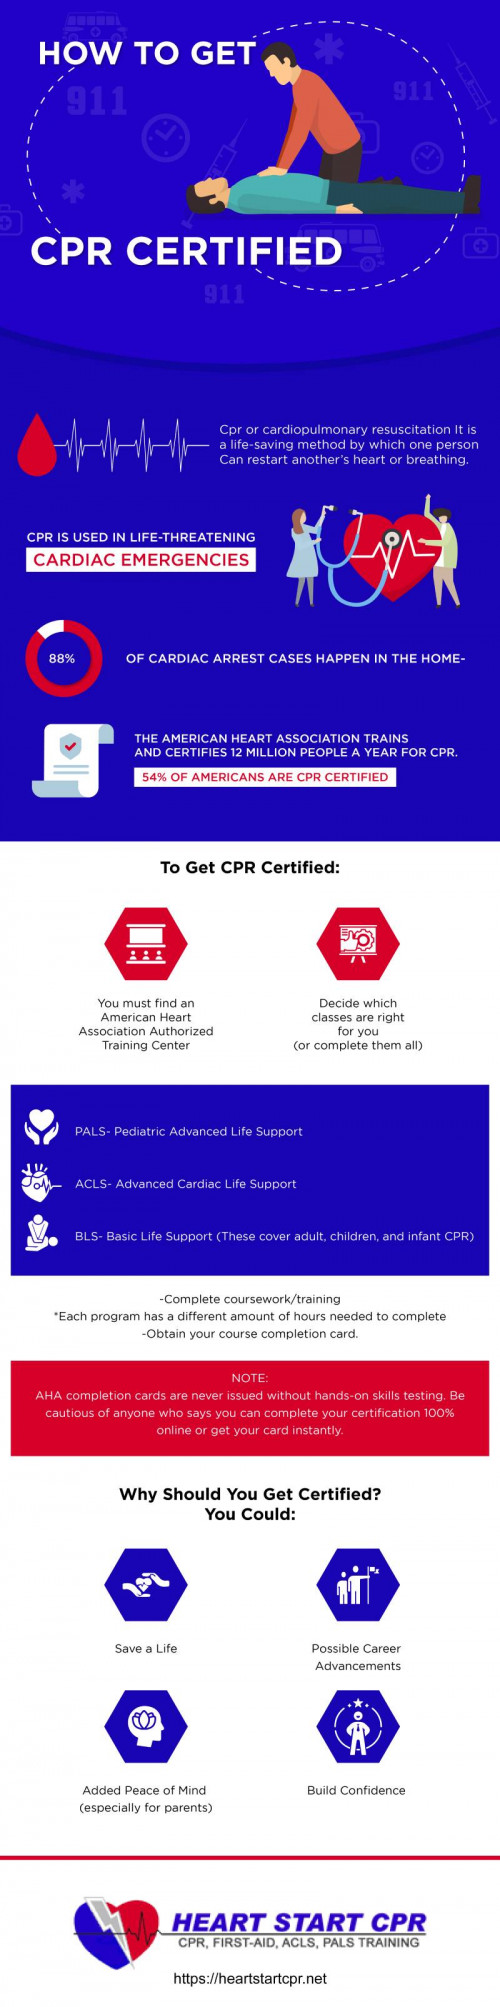 How-To-Get-CPR-Certified-Infographic-by-Heart-Start-CPR.jpg